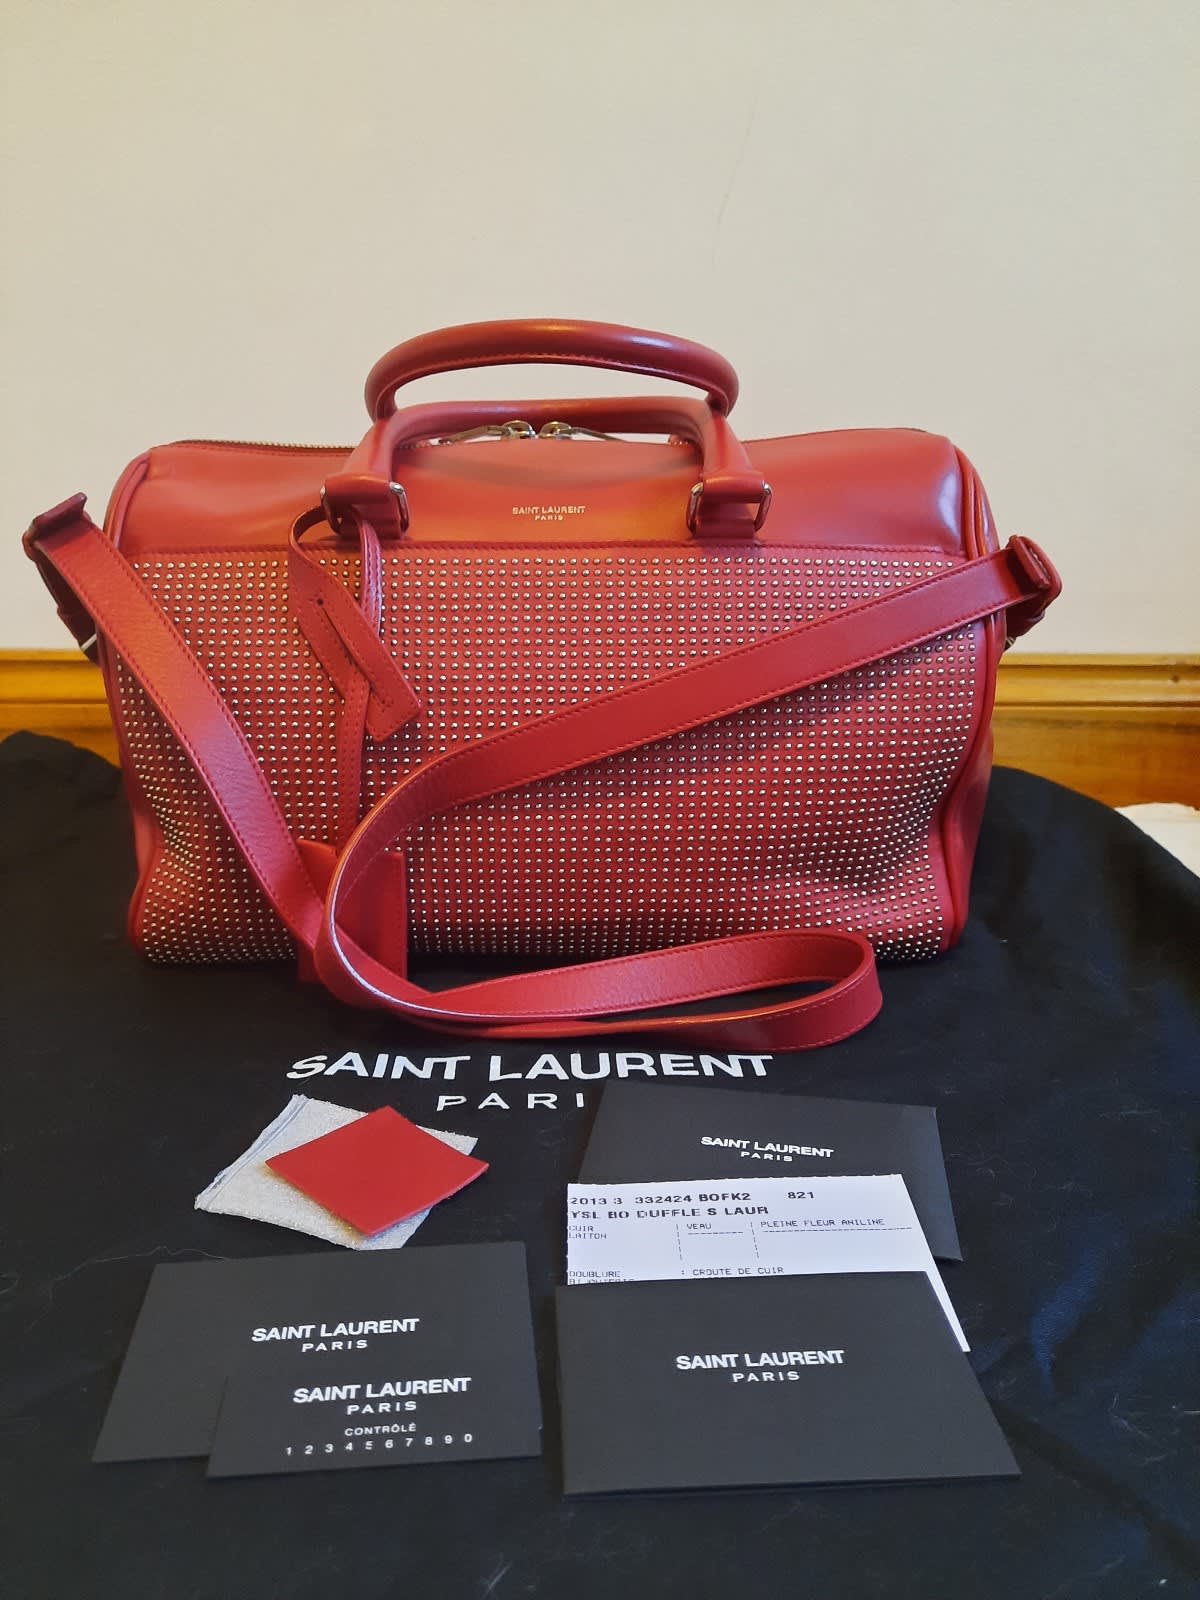 Authentic ysl bag, small loulou bag. Pickup Bentley with cash